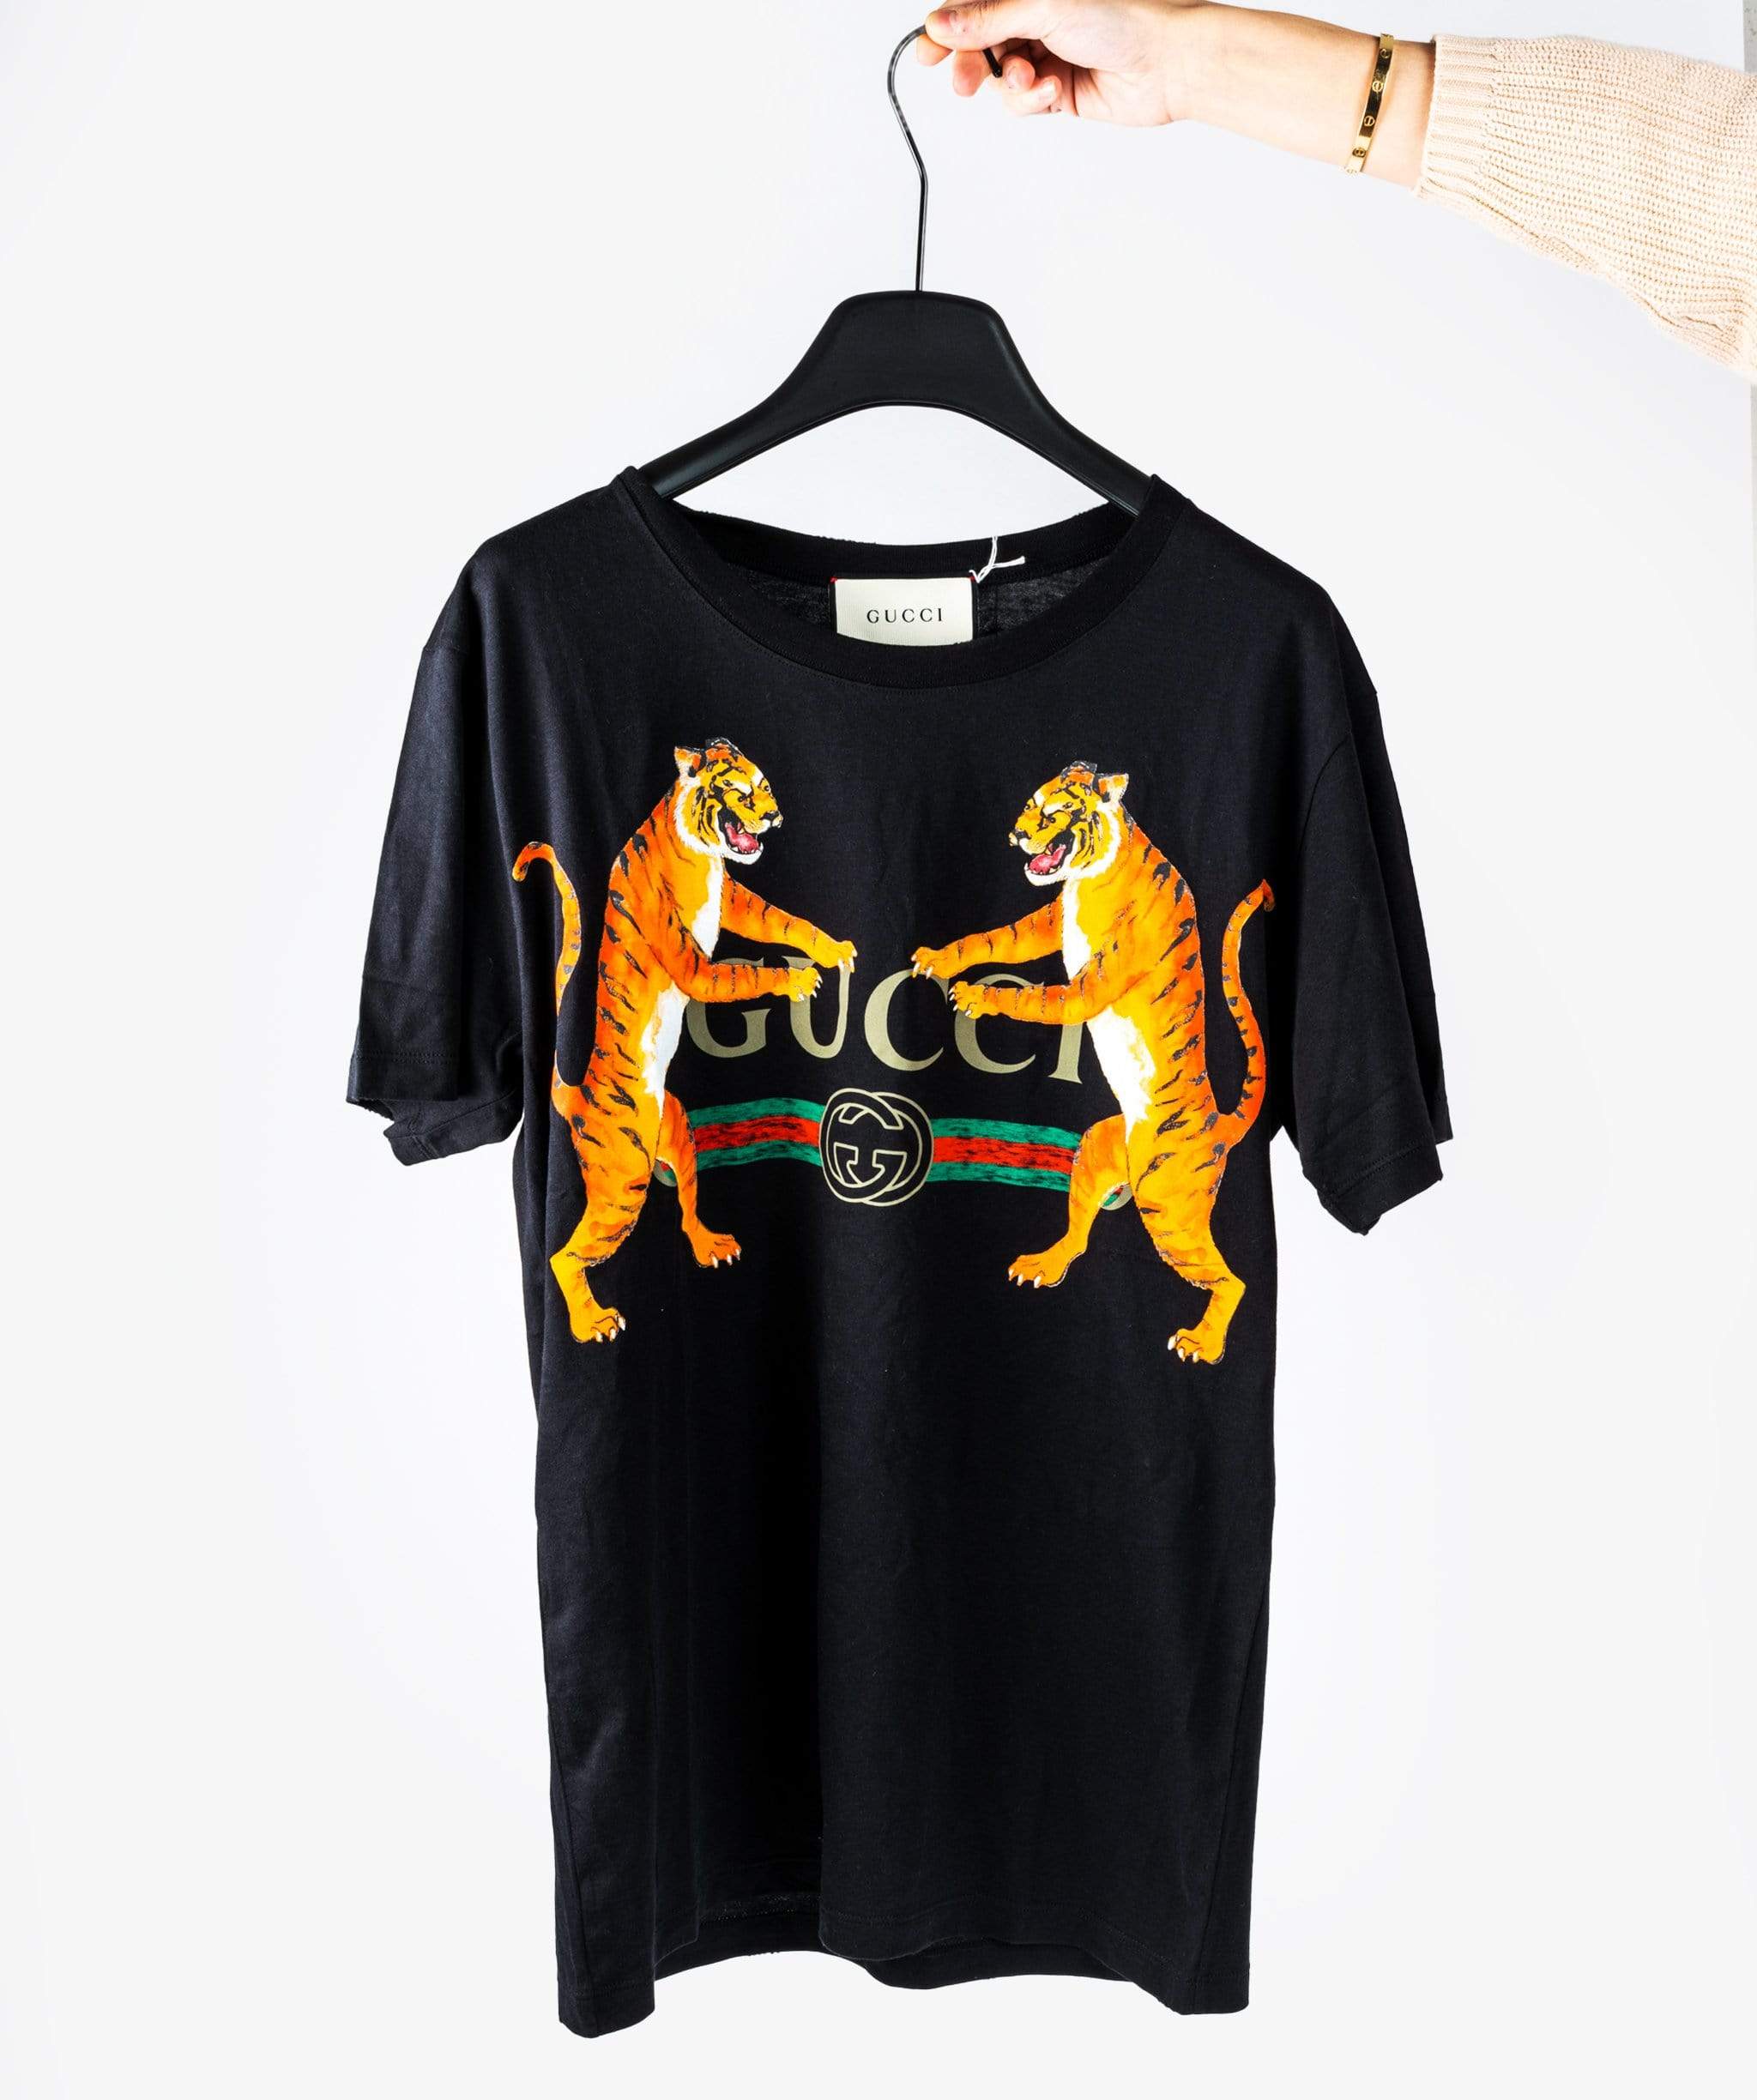 Papua Ny Guinea Credential derefter Gucci Black Tiger Print T-shirt – LuxuryPromise